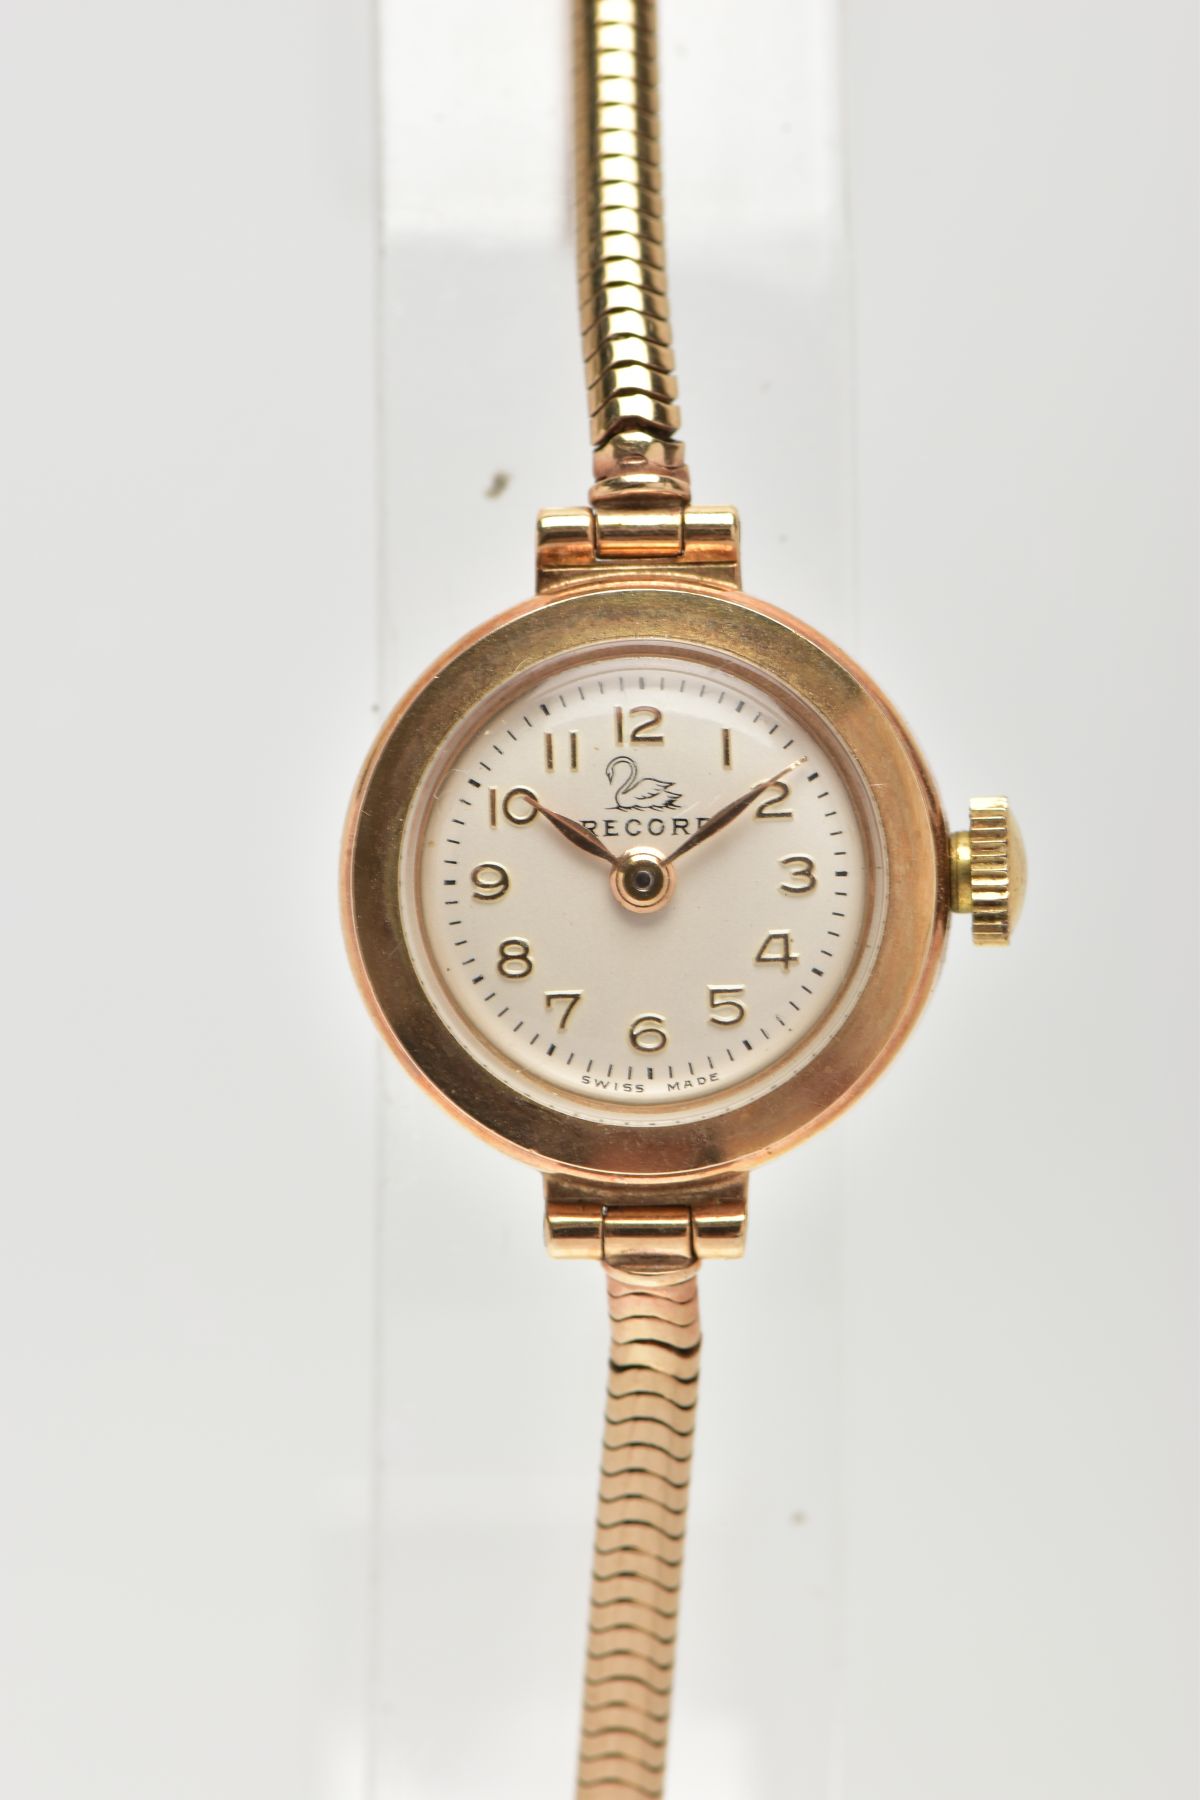 A 9CT GOLD LADIES WRISTWATCH, a hand wound movement, round white dial signed 'Record', Arabic